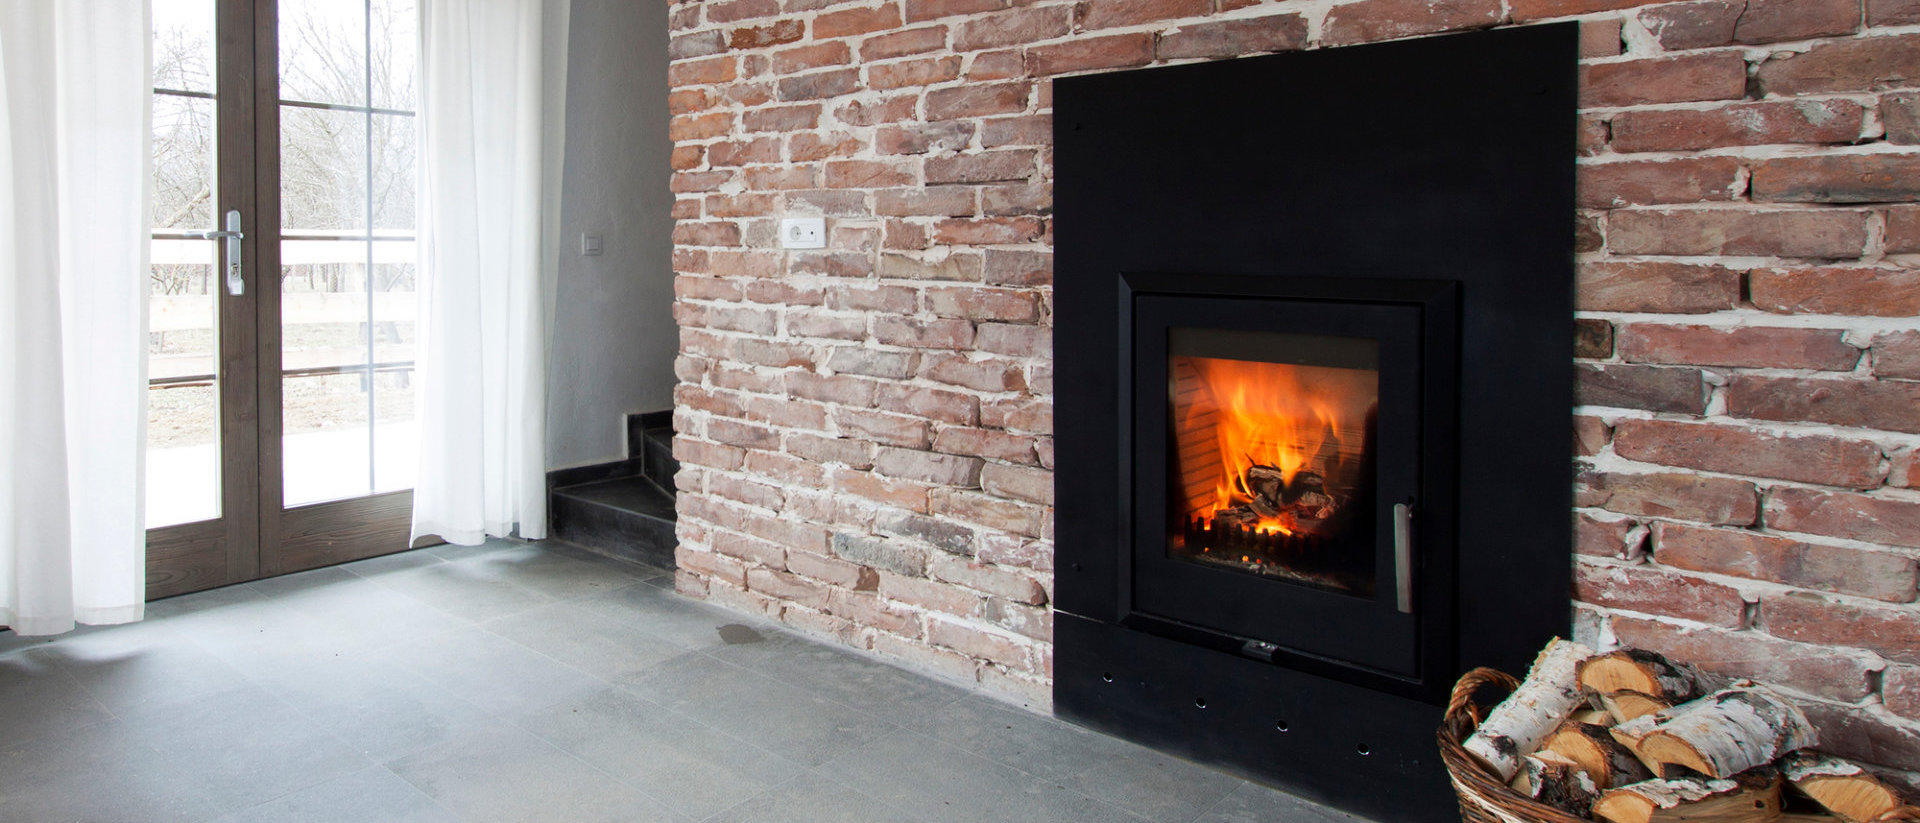 Hire KC Chimney Sweep to clean your fireplaces of creosote build-up.